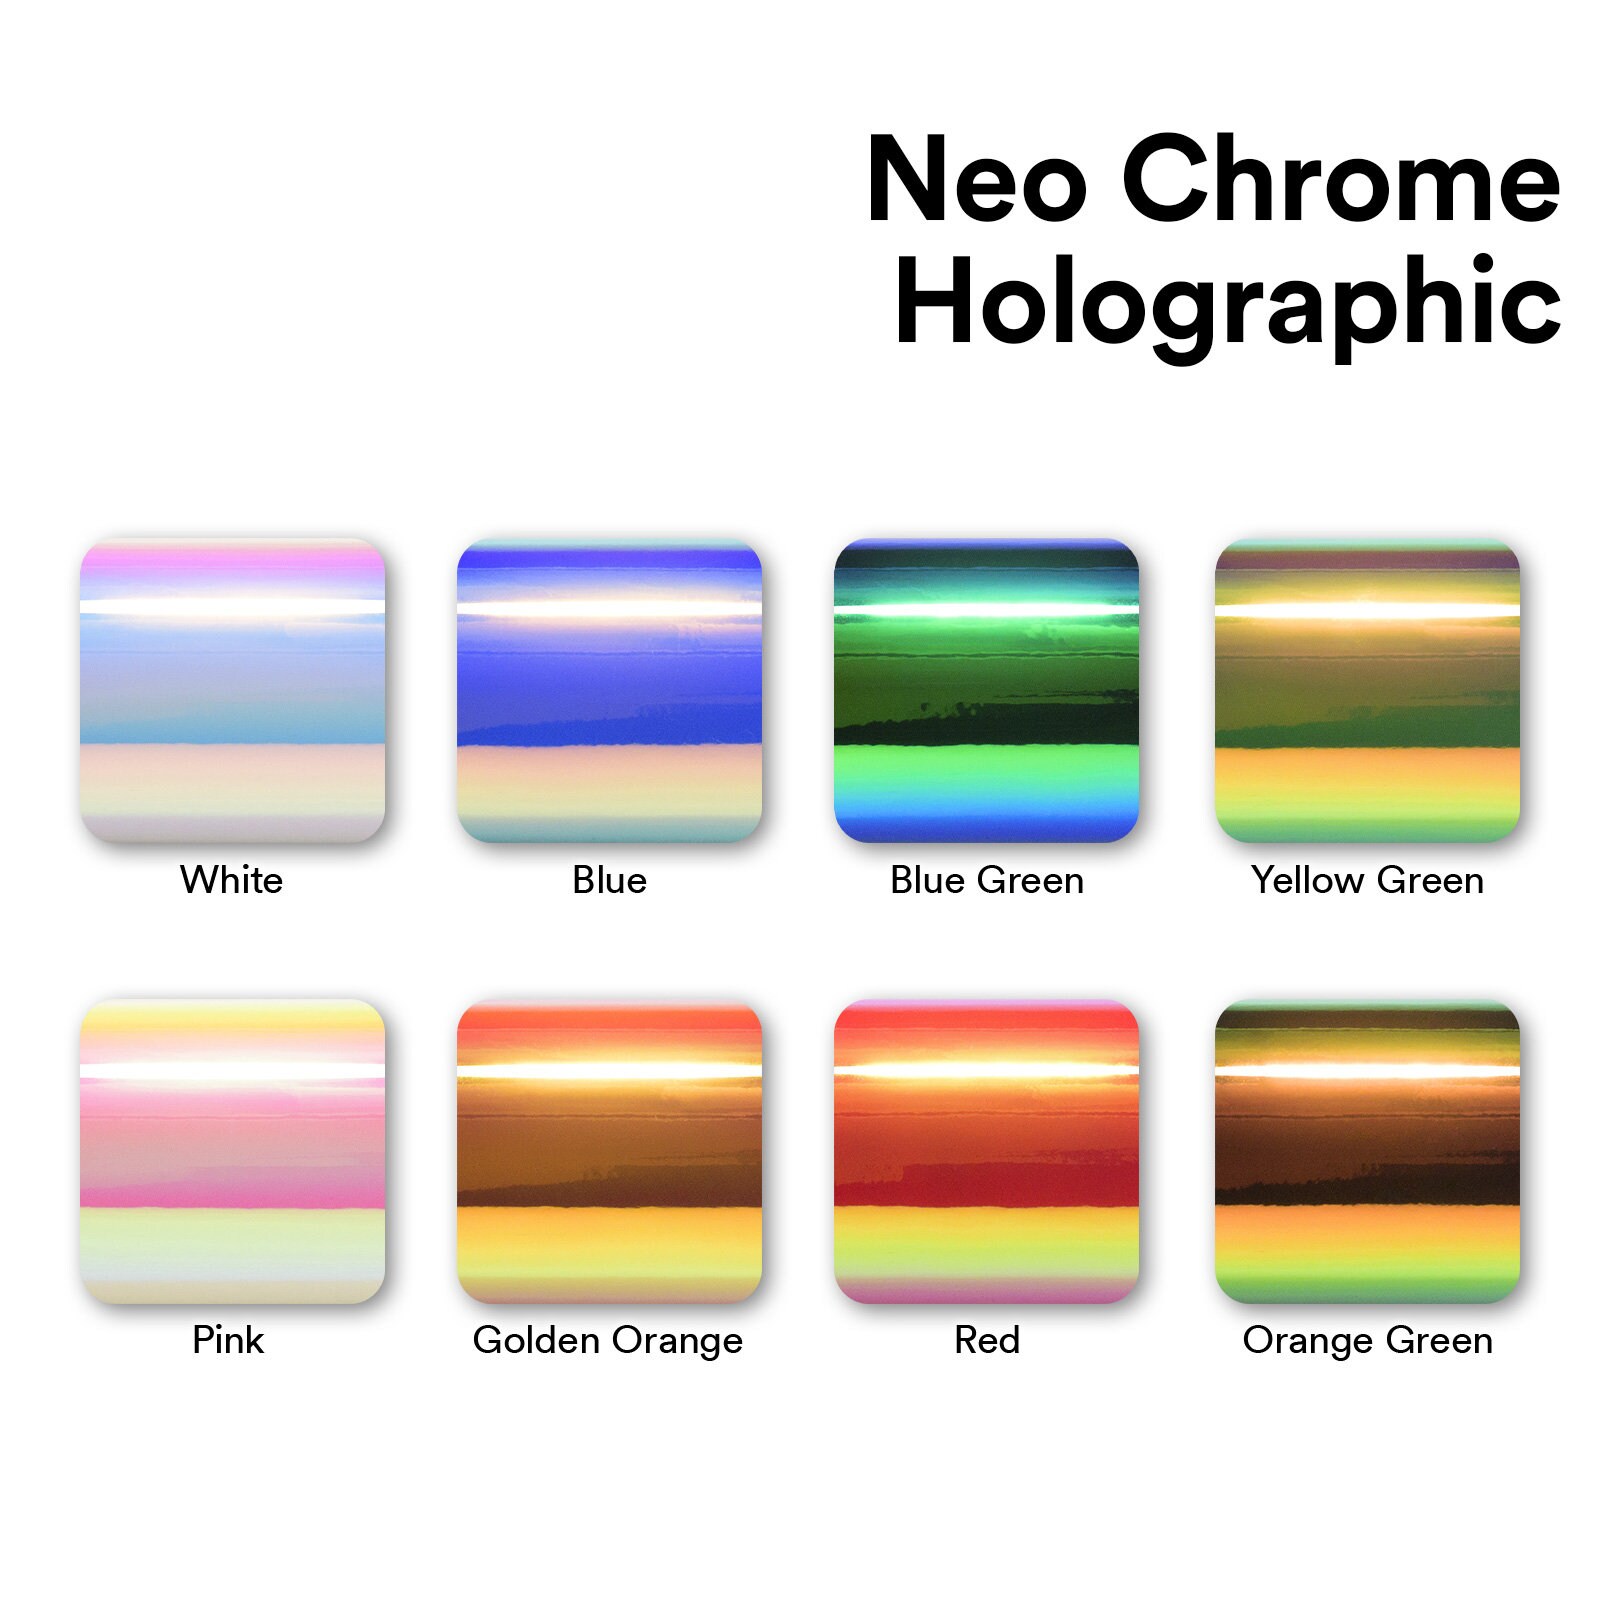 Holographic Red Rainbow Neo Chrome Gloss Vinyl Wrap Sticker Decal